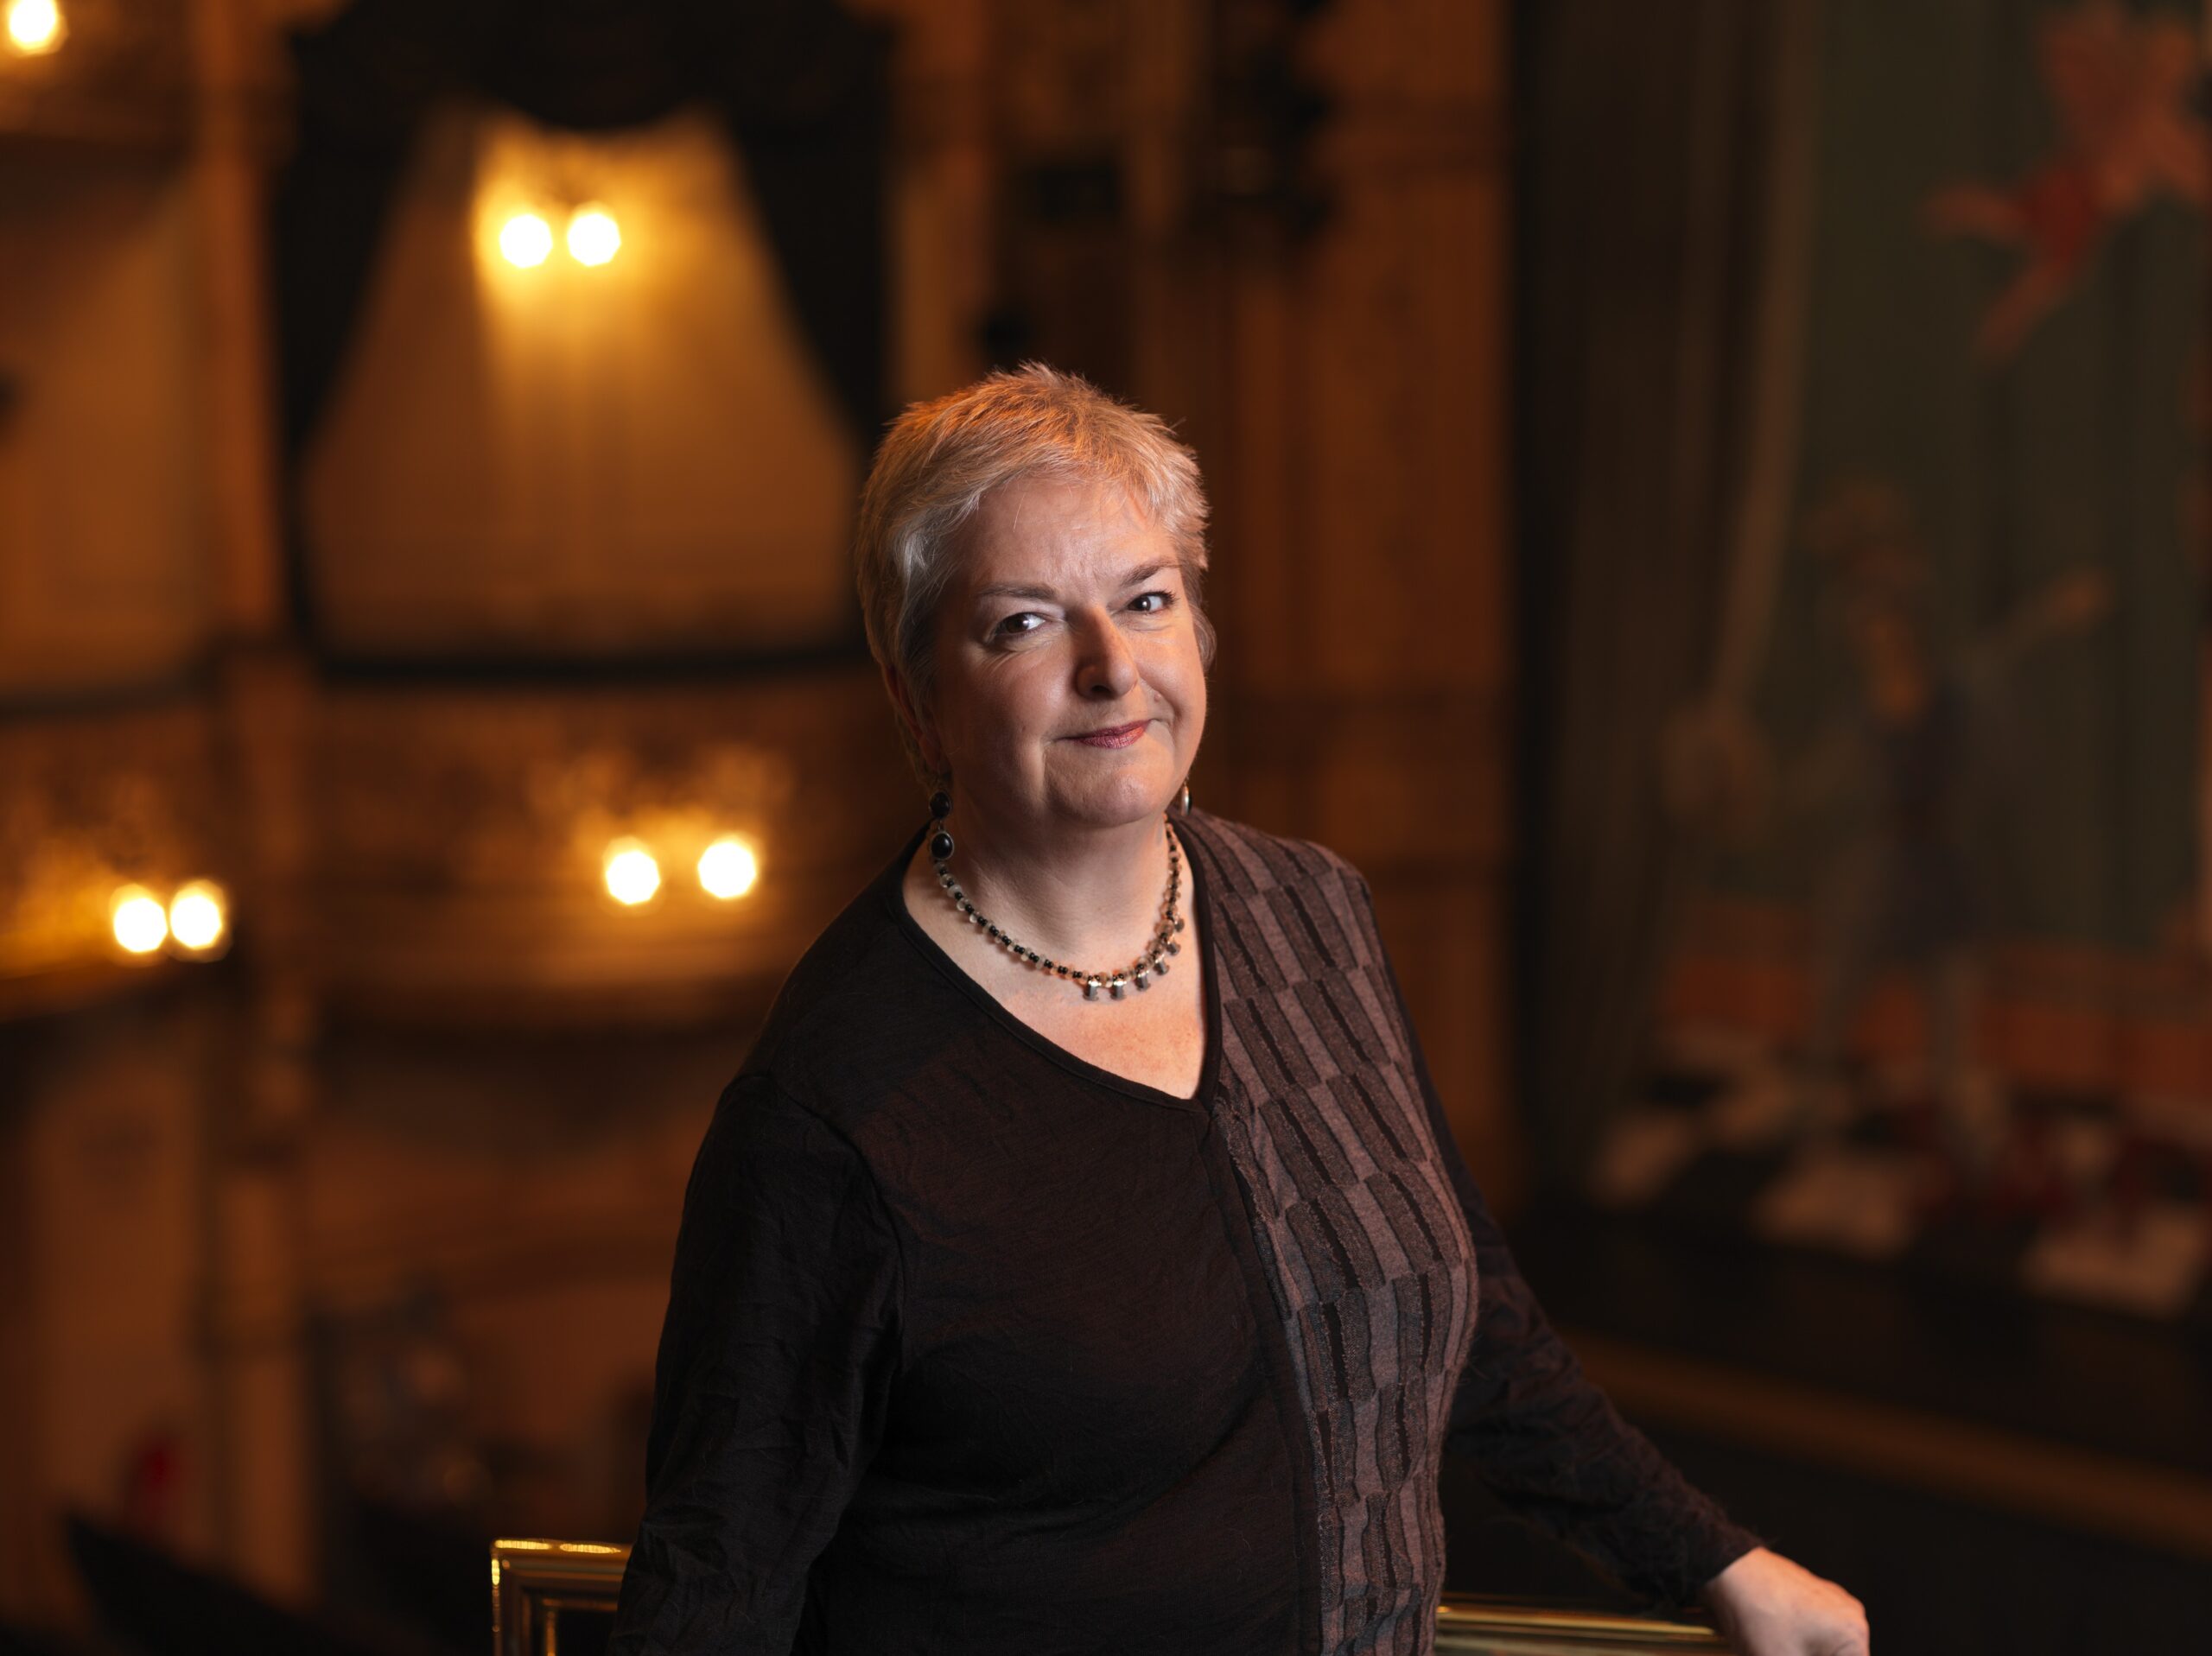 Blackpool Grand Theatre announces the death of former Chief Executive, Ruth Eastwood